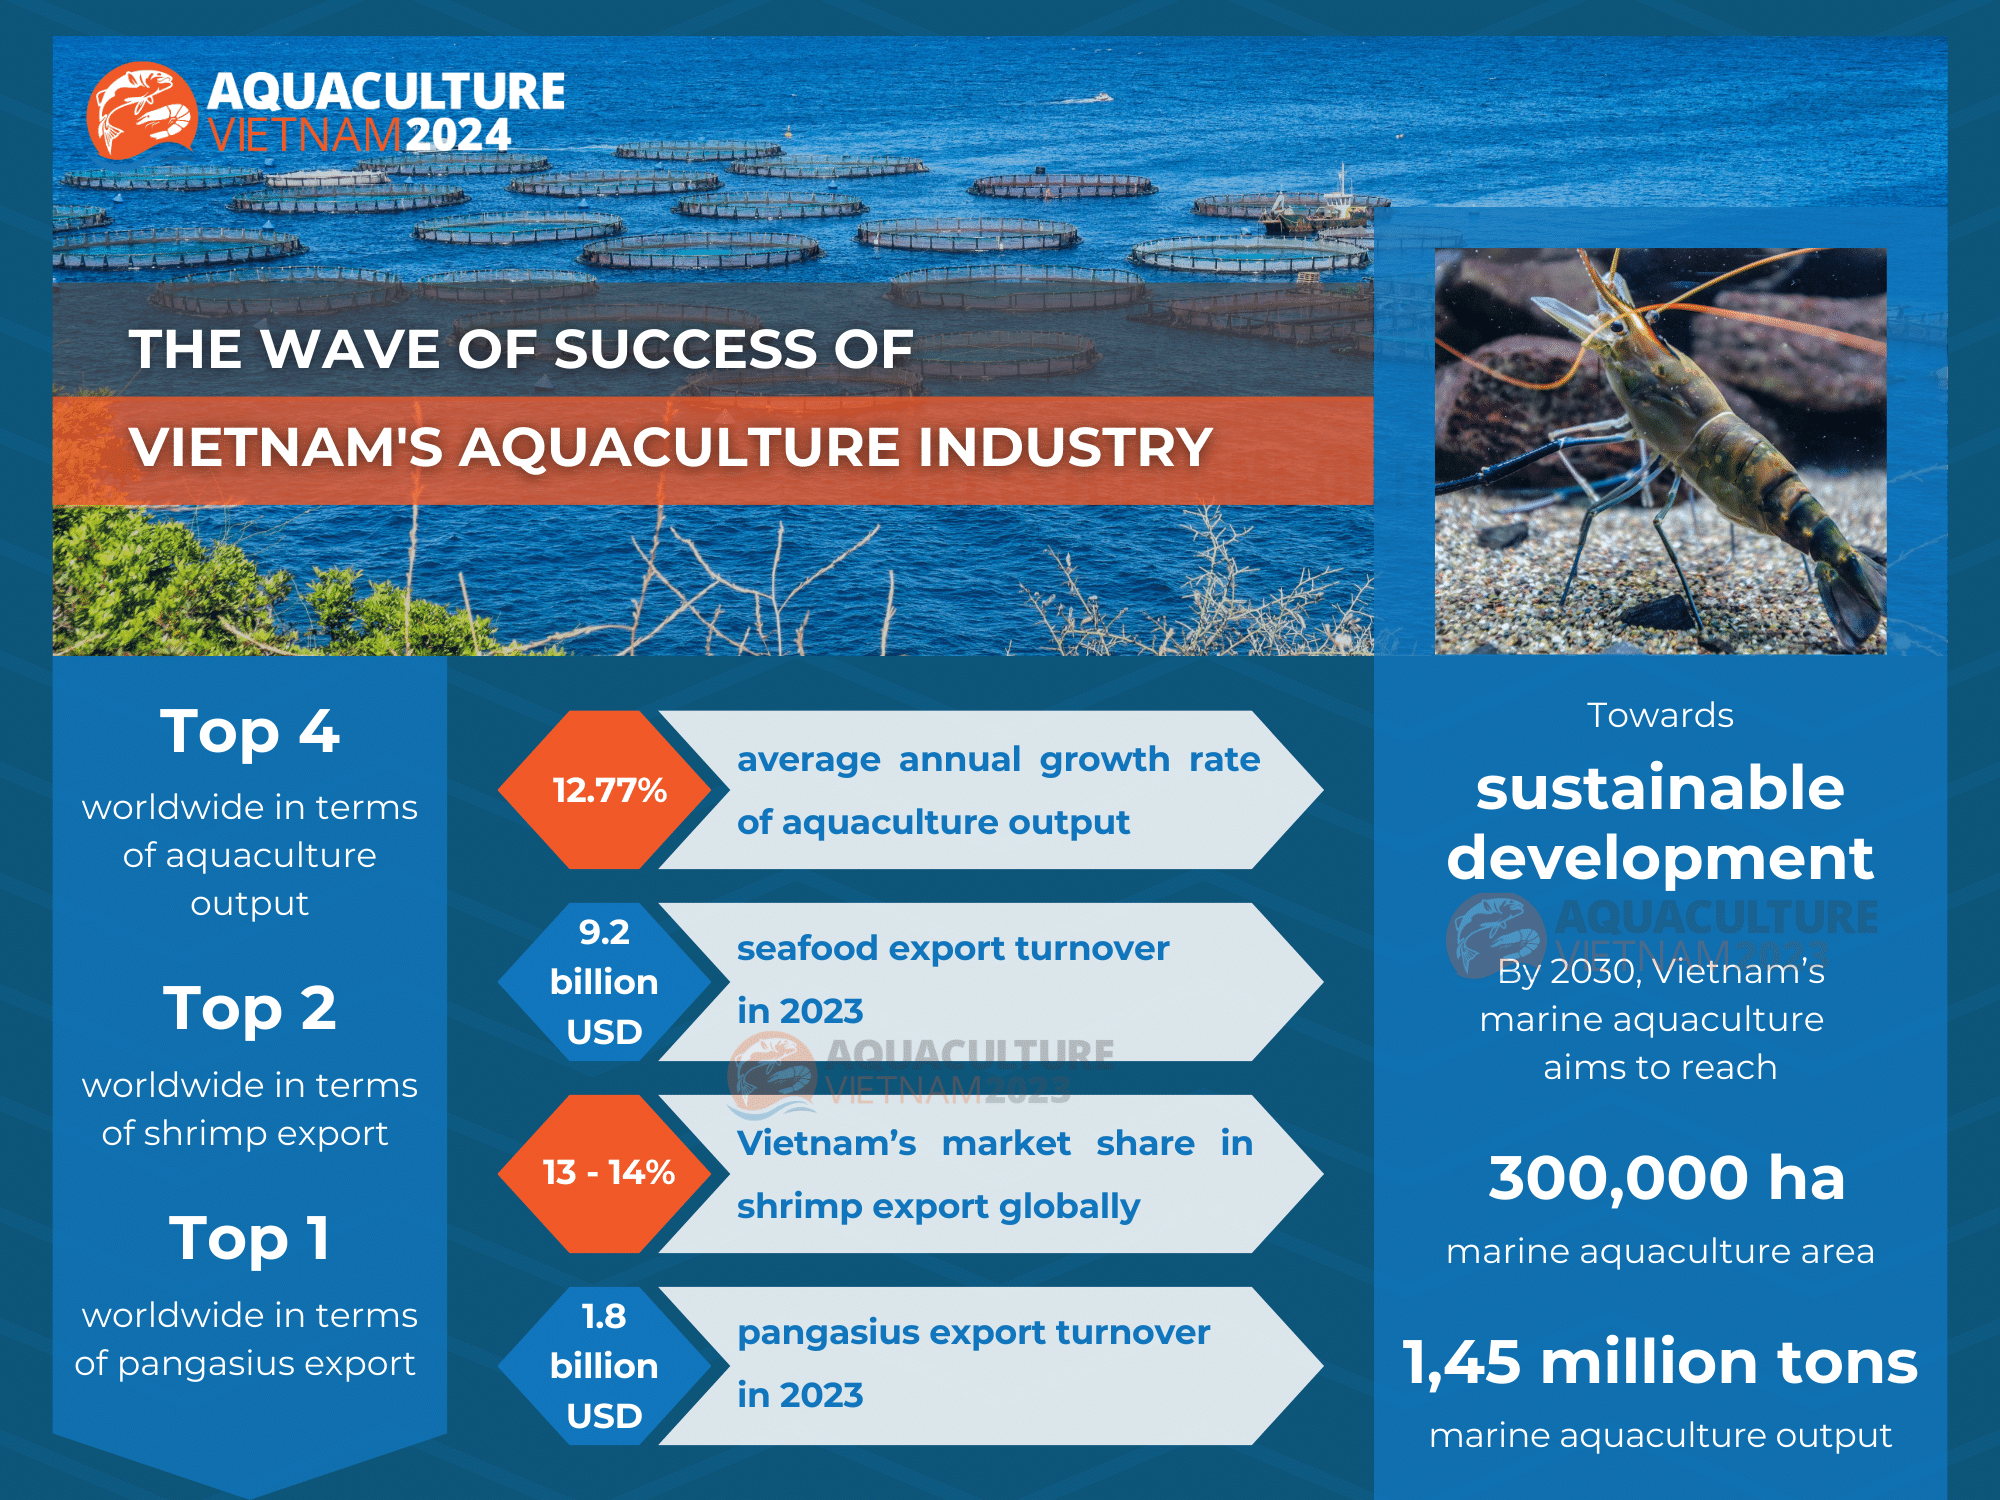 Achievements and sustainable development of Vietnam's aquaculture industry